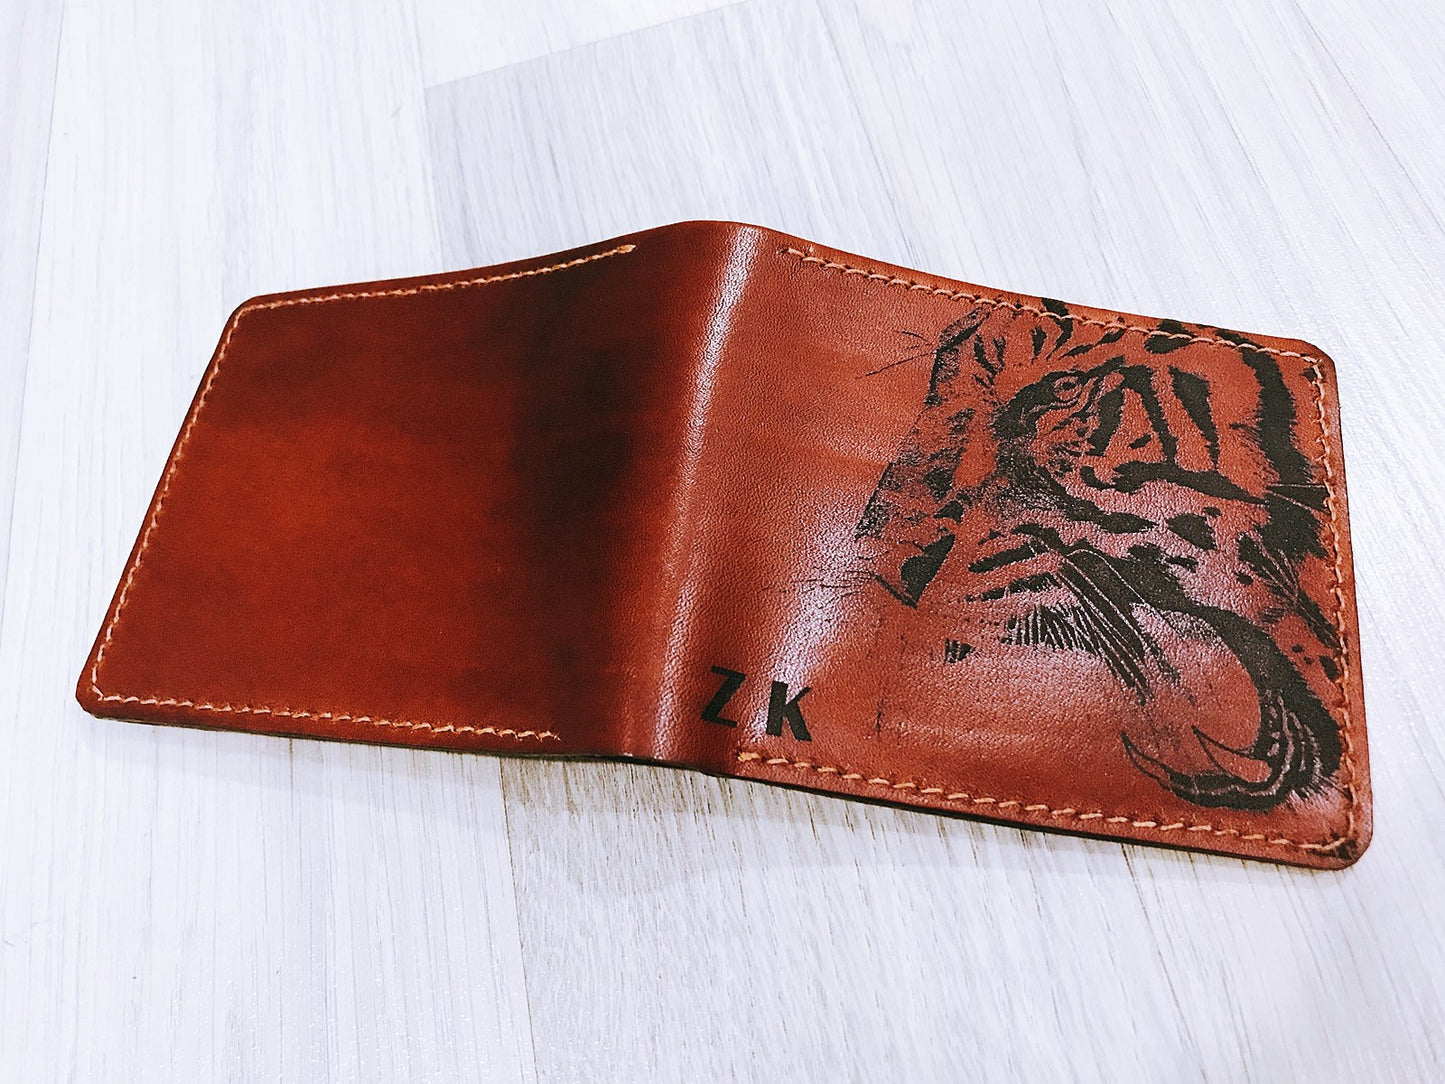 Mayan Corner - Tiger animal leather handmade men's wallet, custom gifts for him, father's day birthday gifts, anniversary gift for men